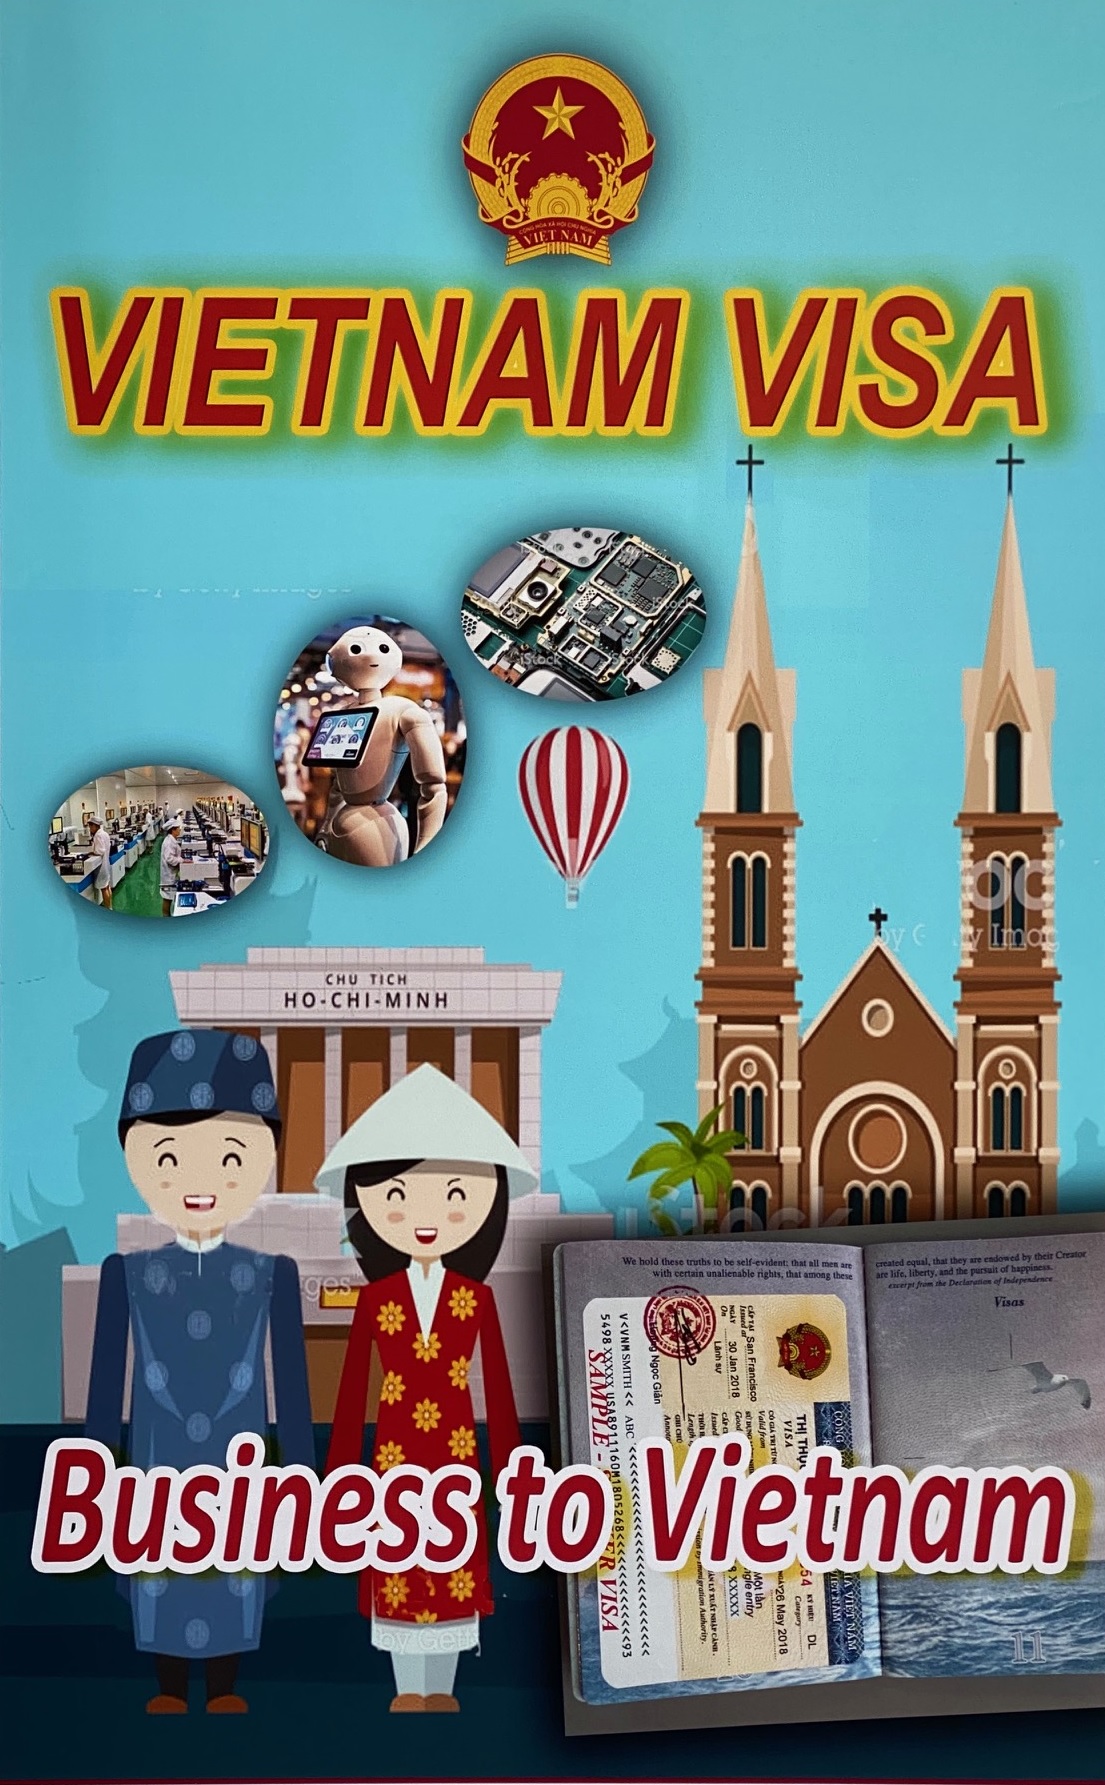 About 3 Months Vietnam Visa Everything You Need to Know